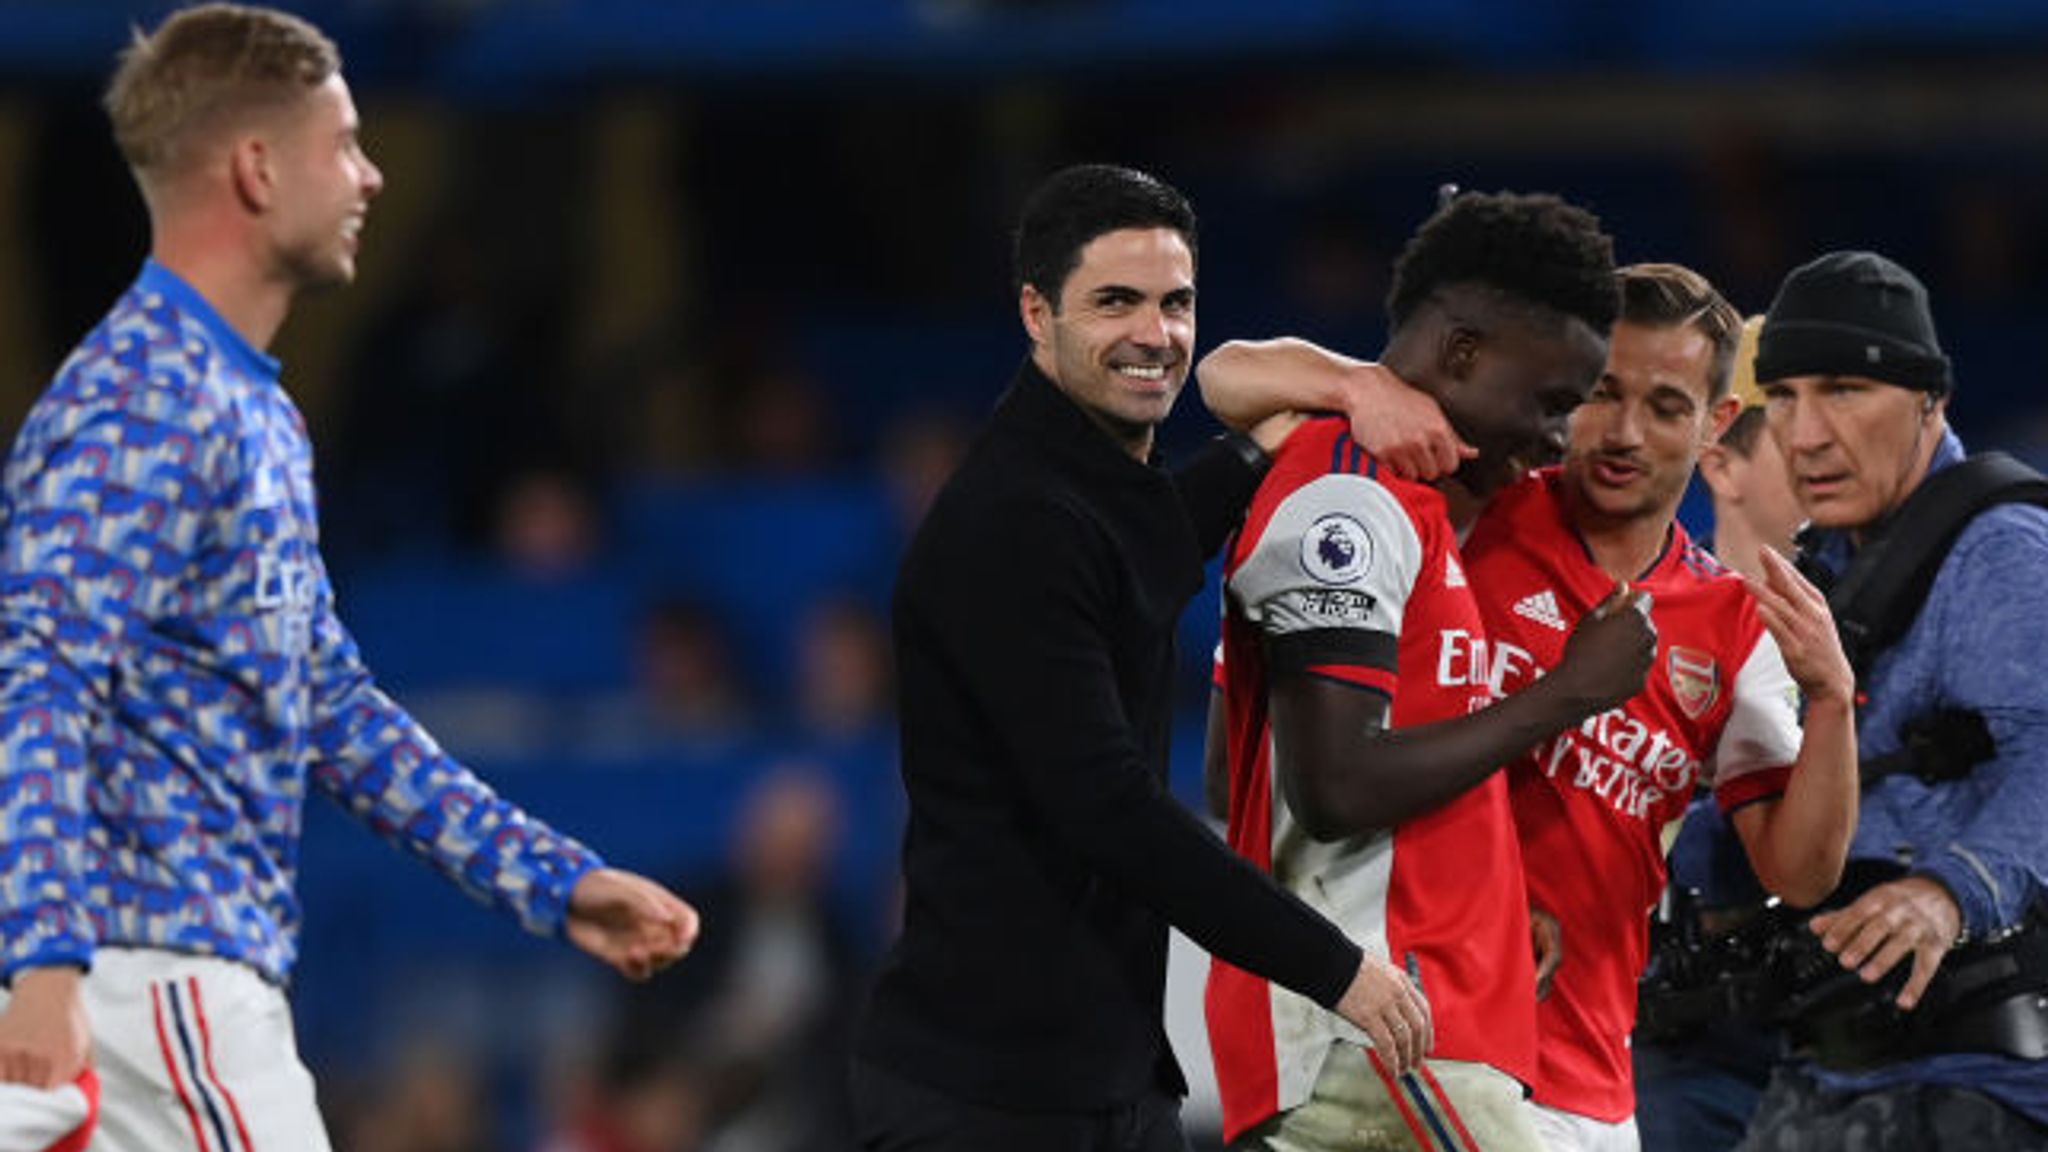 Mikel Arteta says Arsenal's 4-2 victory over Chelsea can give the Gunners belief in their important upcoming matches | Football News | Sky Sports